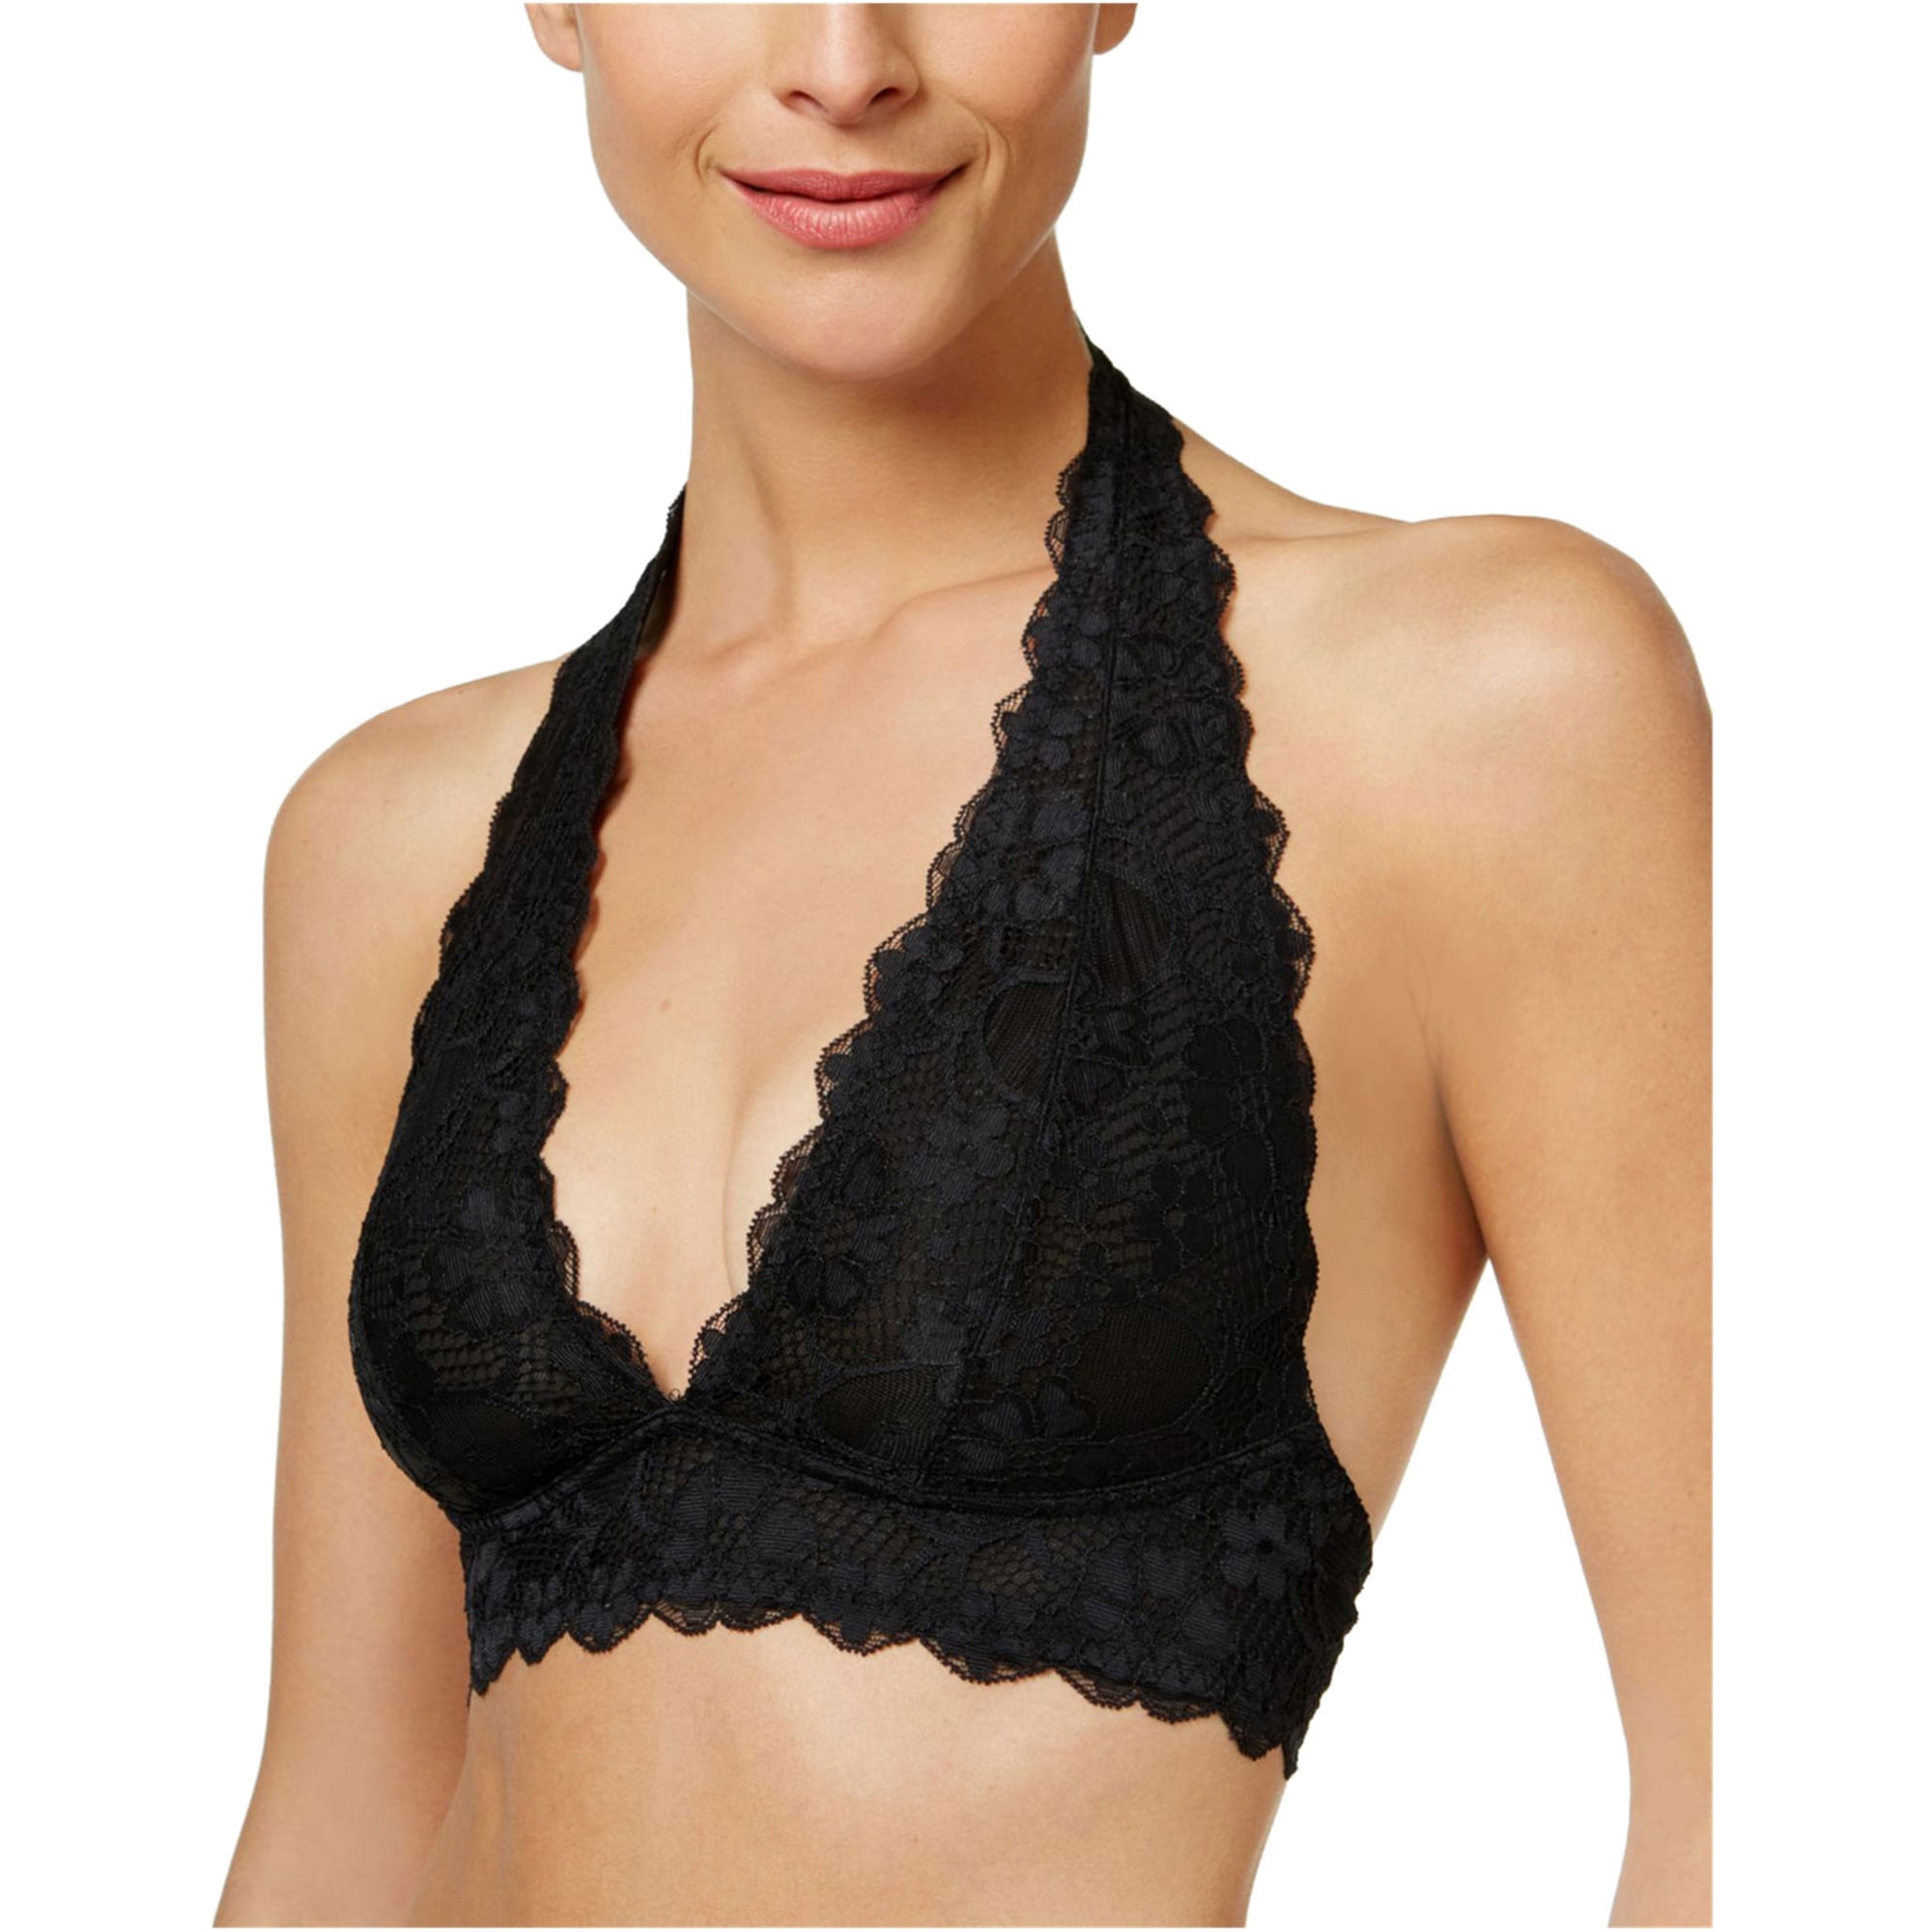 Intimately Free People Women's Galloon Lace Halter Bralette Black Size M